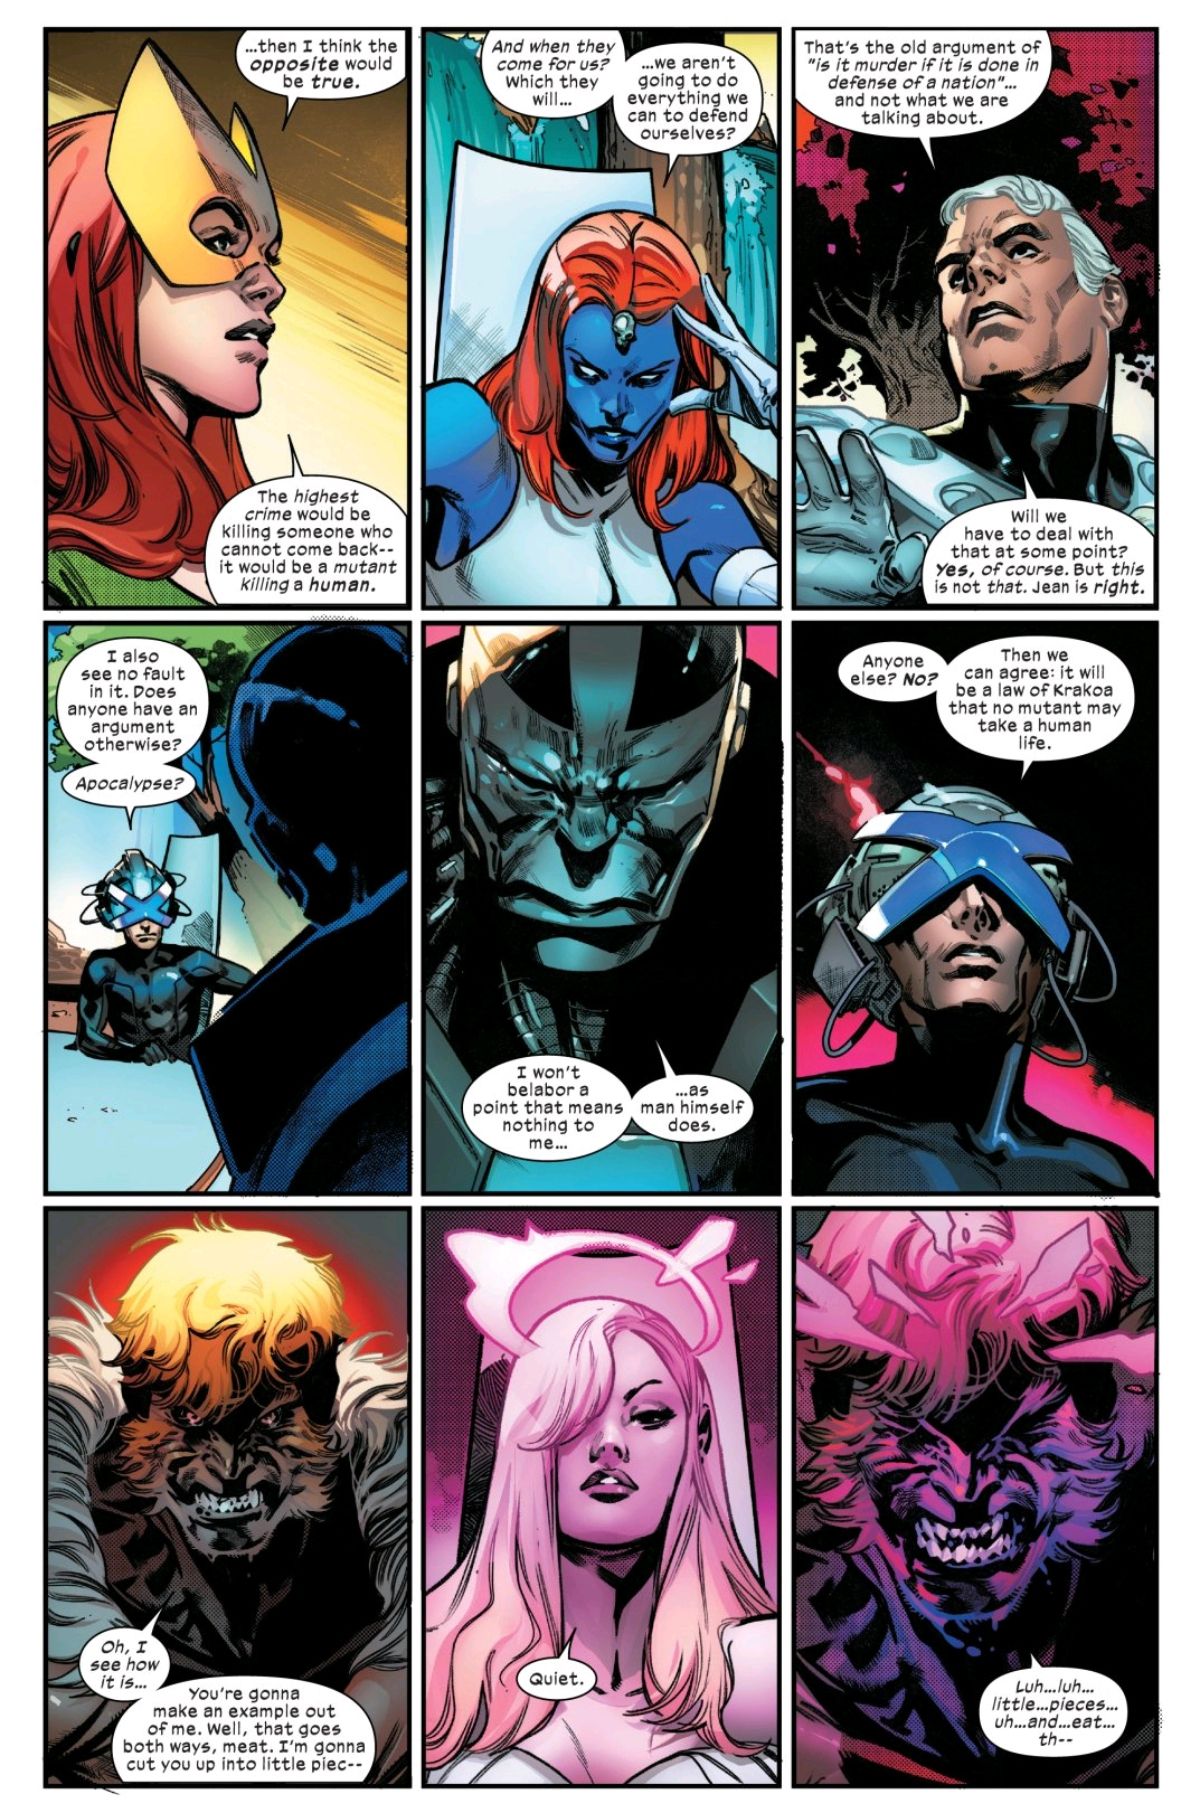 The Quiet Council of Krakoa discusses the first law of Mutants: That no mutant should take a human life, in House of X #6, Marvel Comics (2019). 